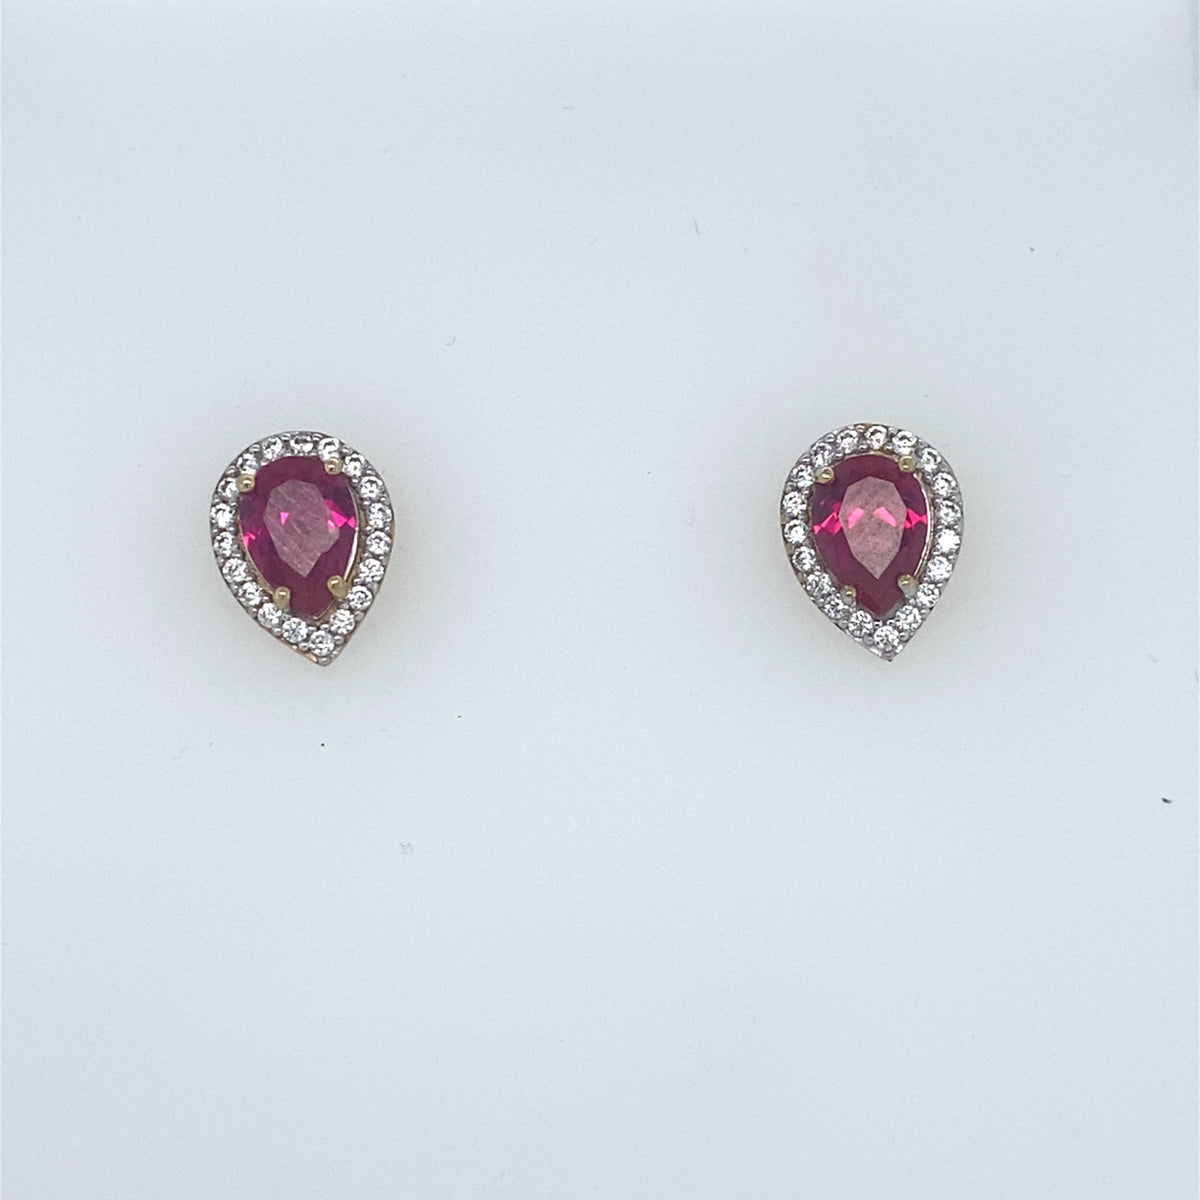 9kt Gold Pear Shaped Ruby Coloured Earrings